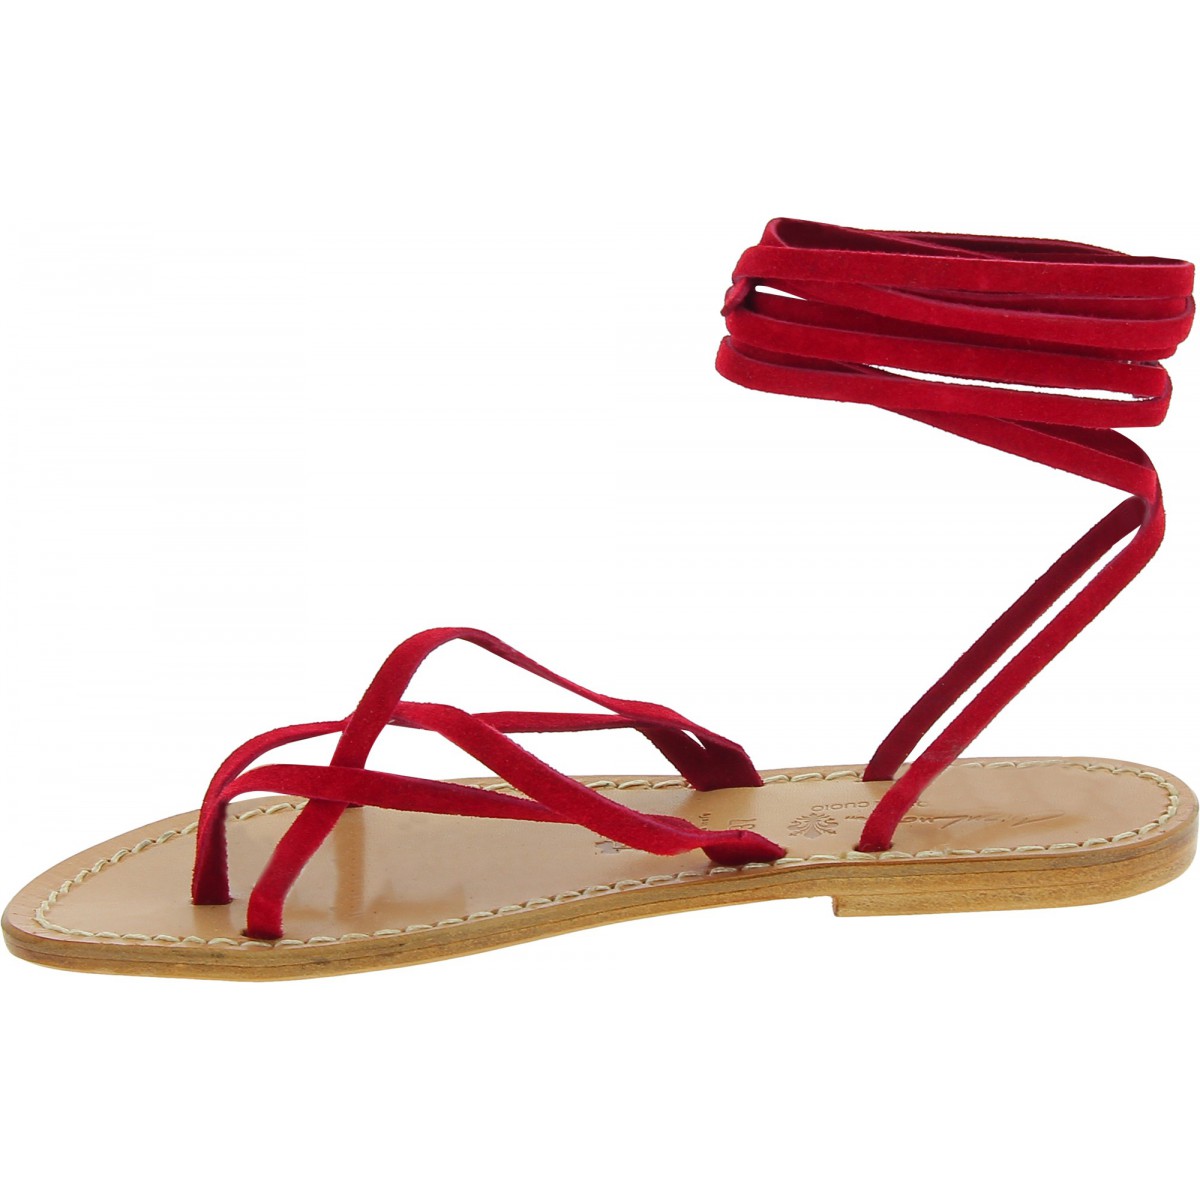 Red nubuck flat strappy sandals for women handmade in Italy | The ...